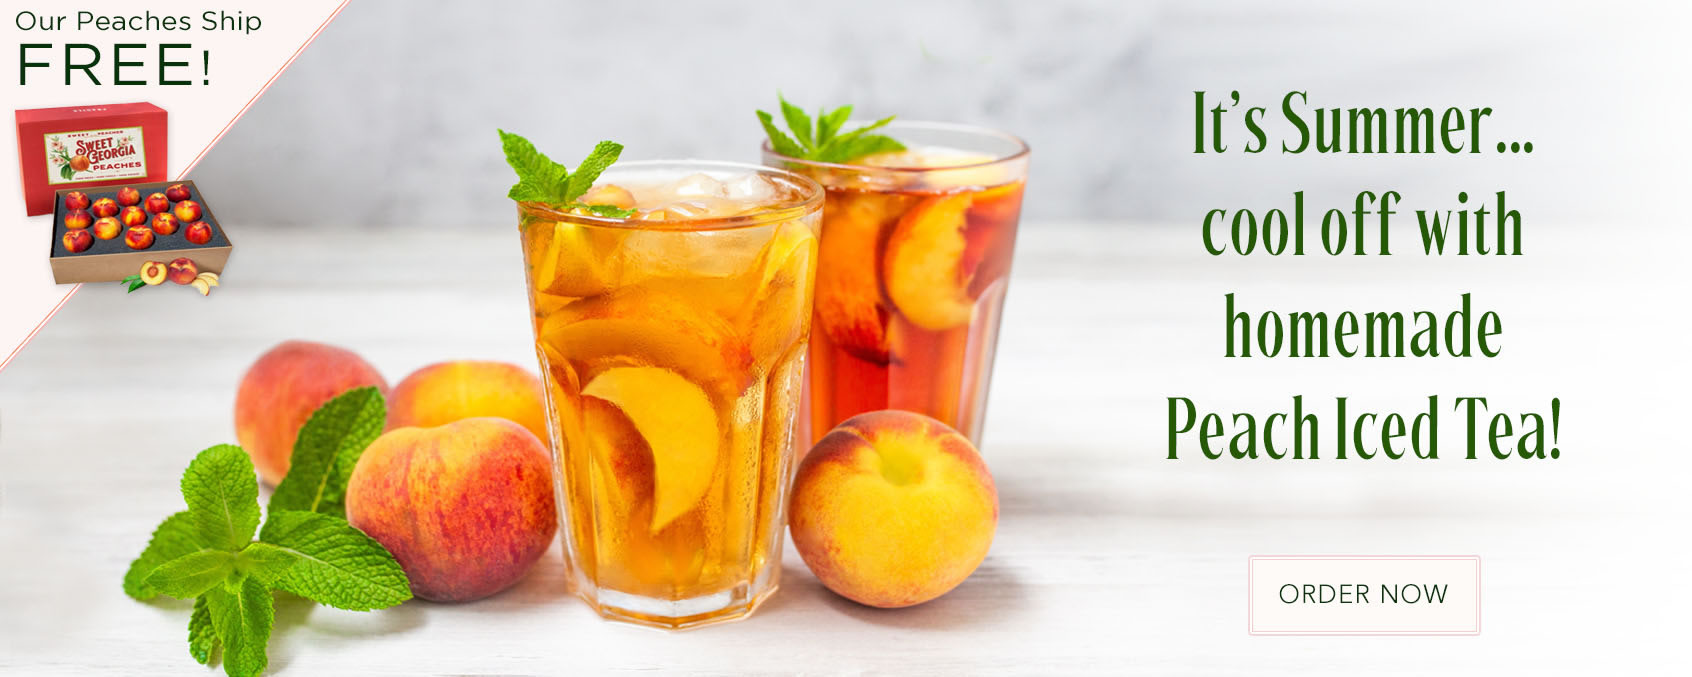 It's Summer cool off with Iced Peach Tea - Peaches ship for FREE